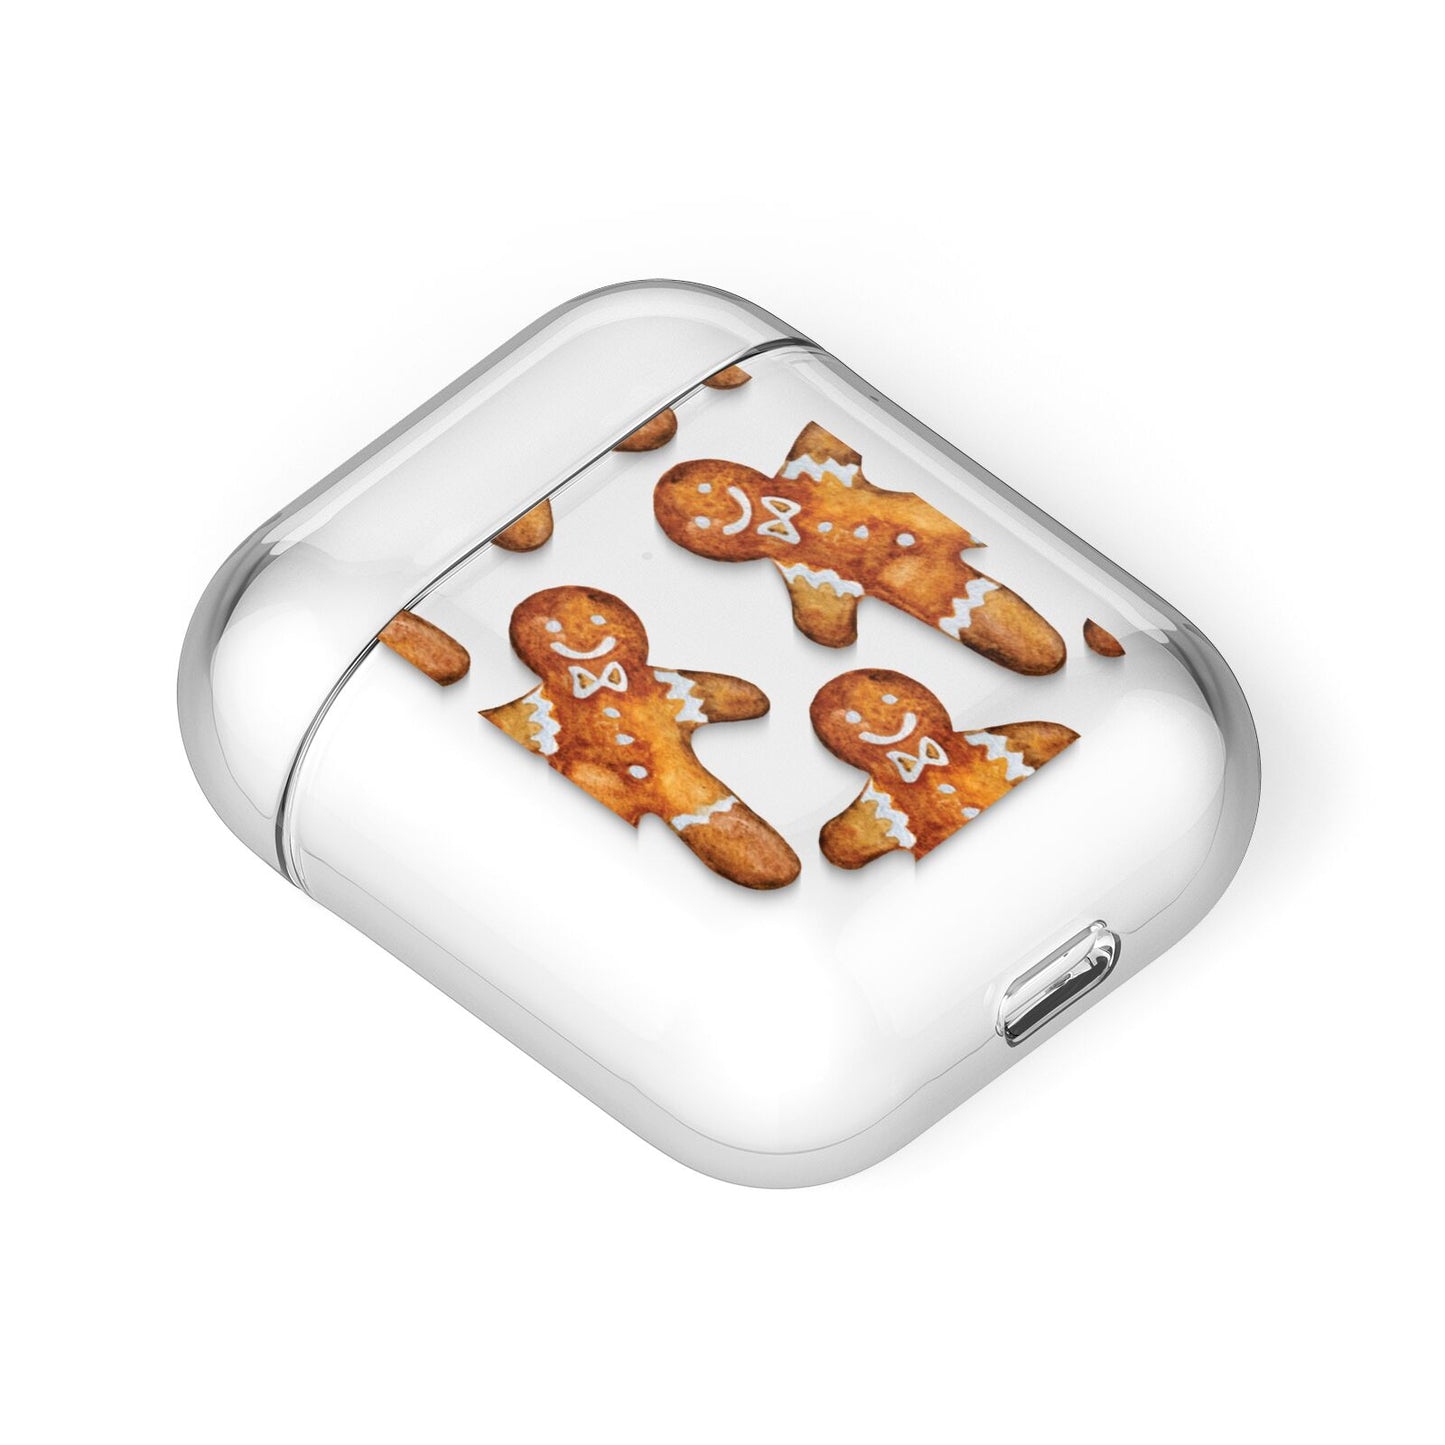 Christmas Gingerbread Man AirPods Case Laid Flat